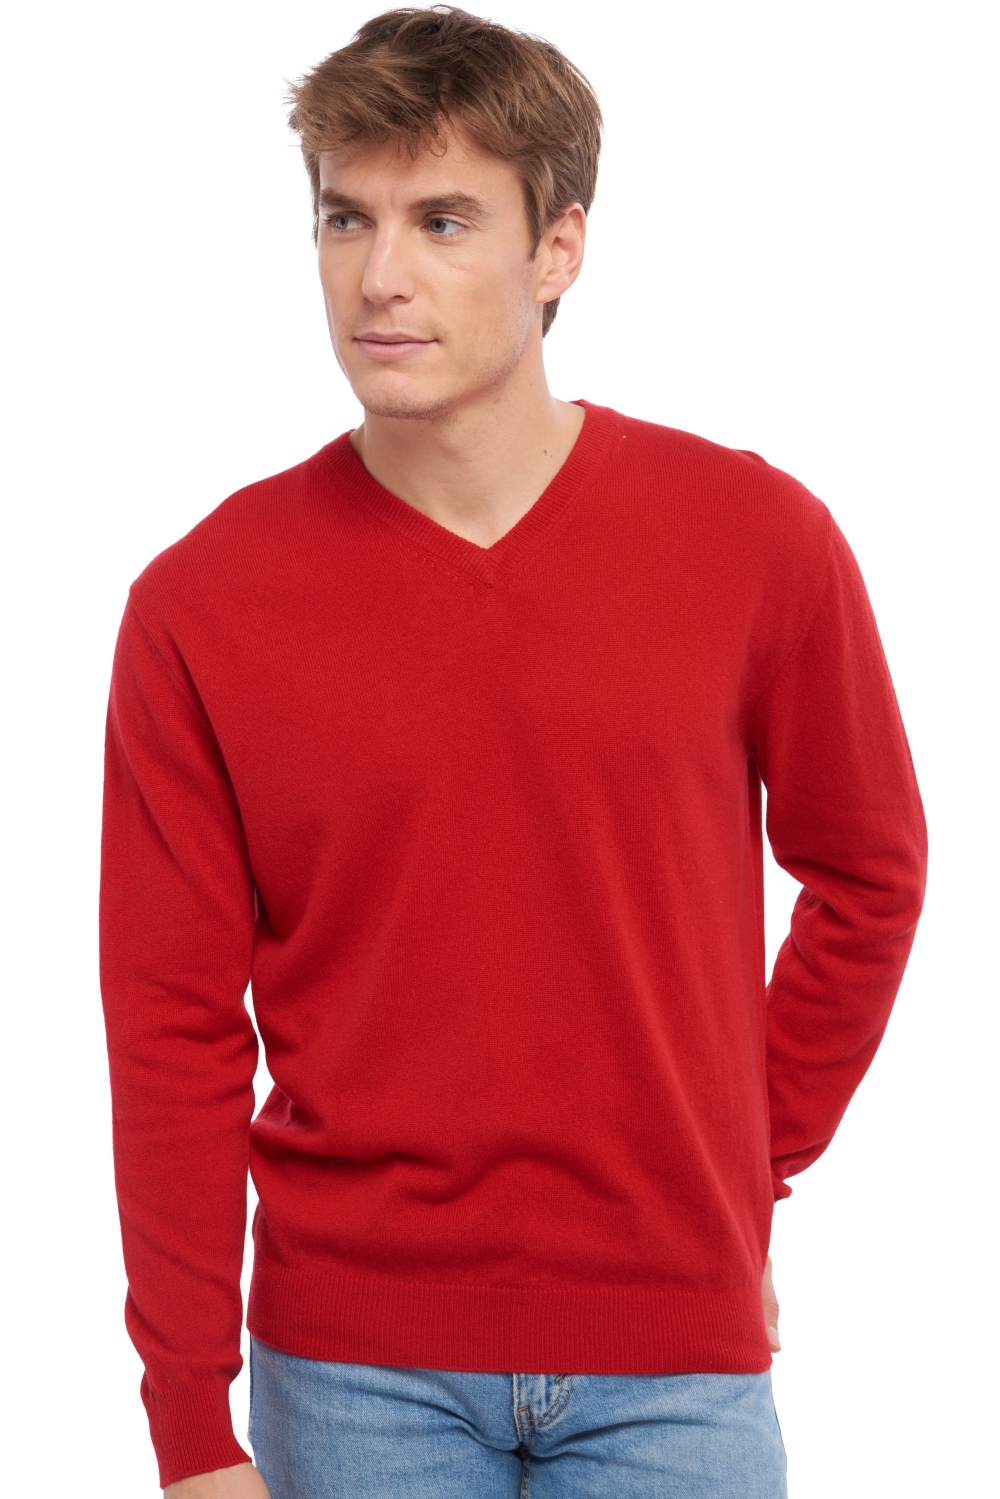 Cachemire pull homme gaspard rouge velours 4xl